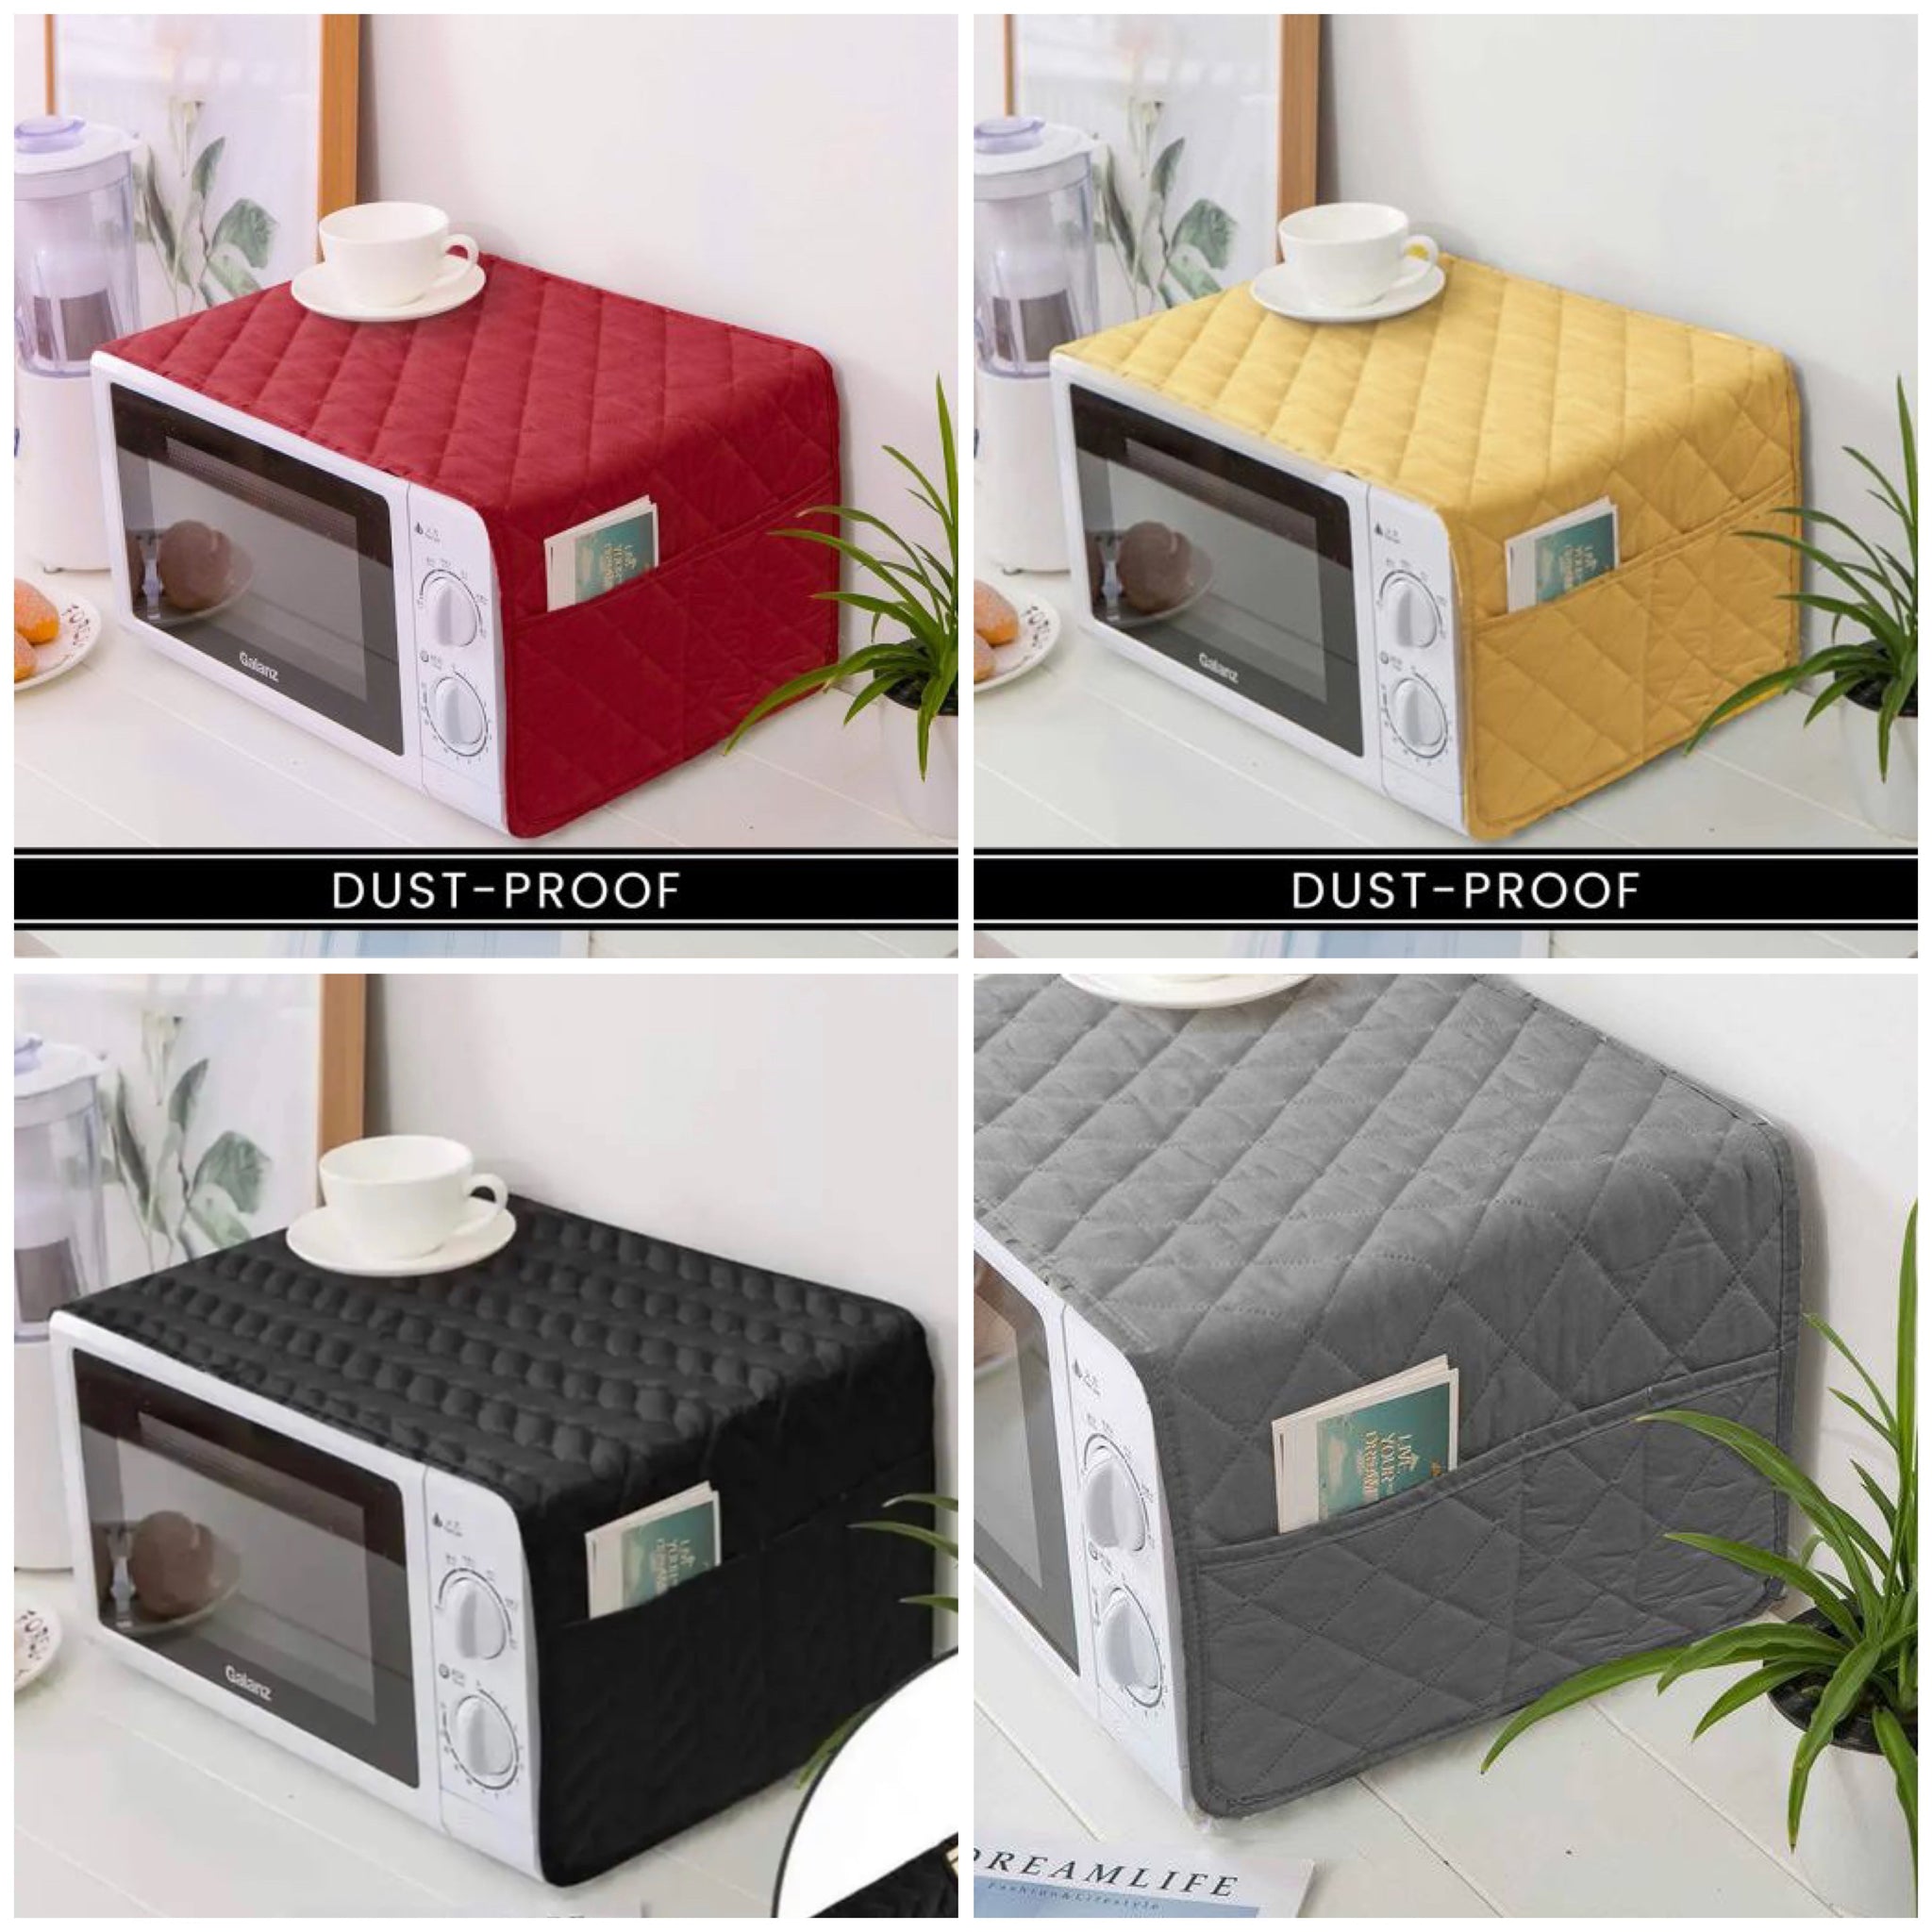 Promotion Clearance! Microwave Oven Dustproof Cover,Microwave